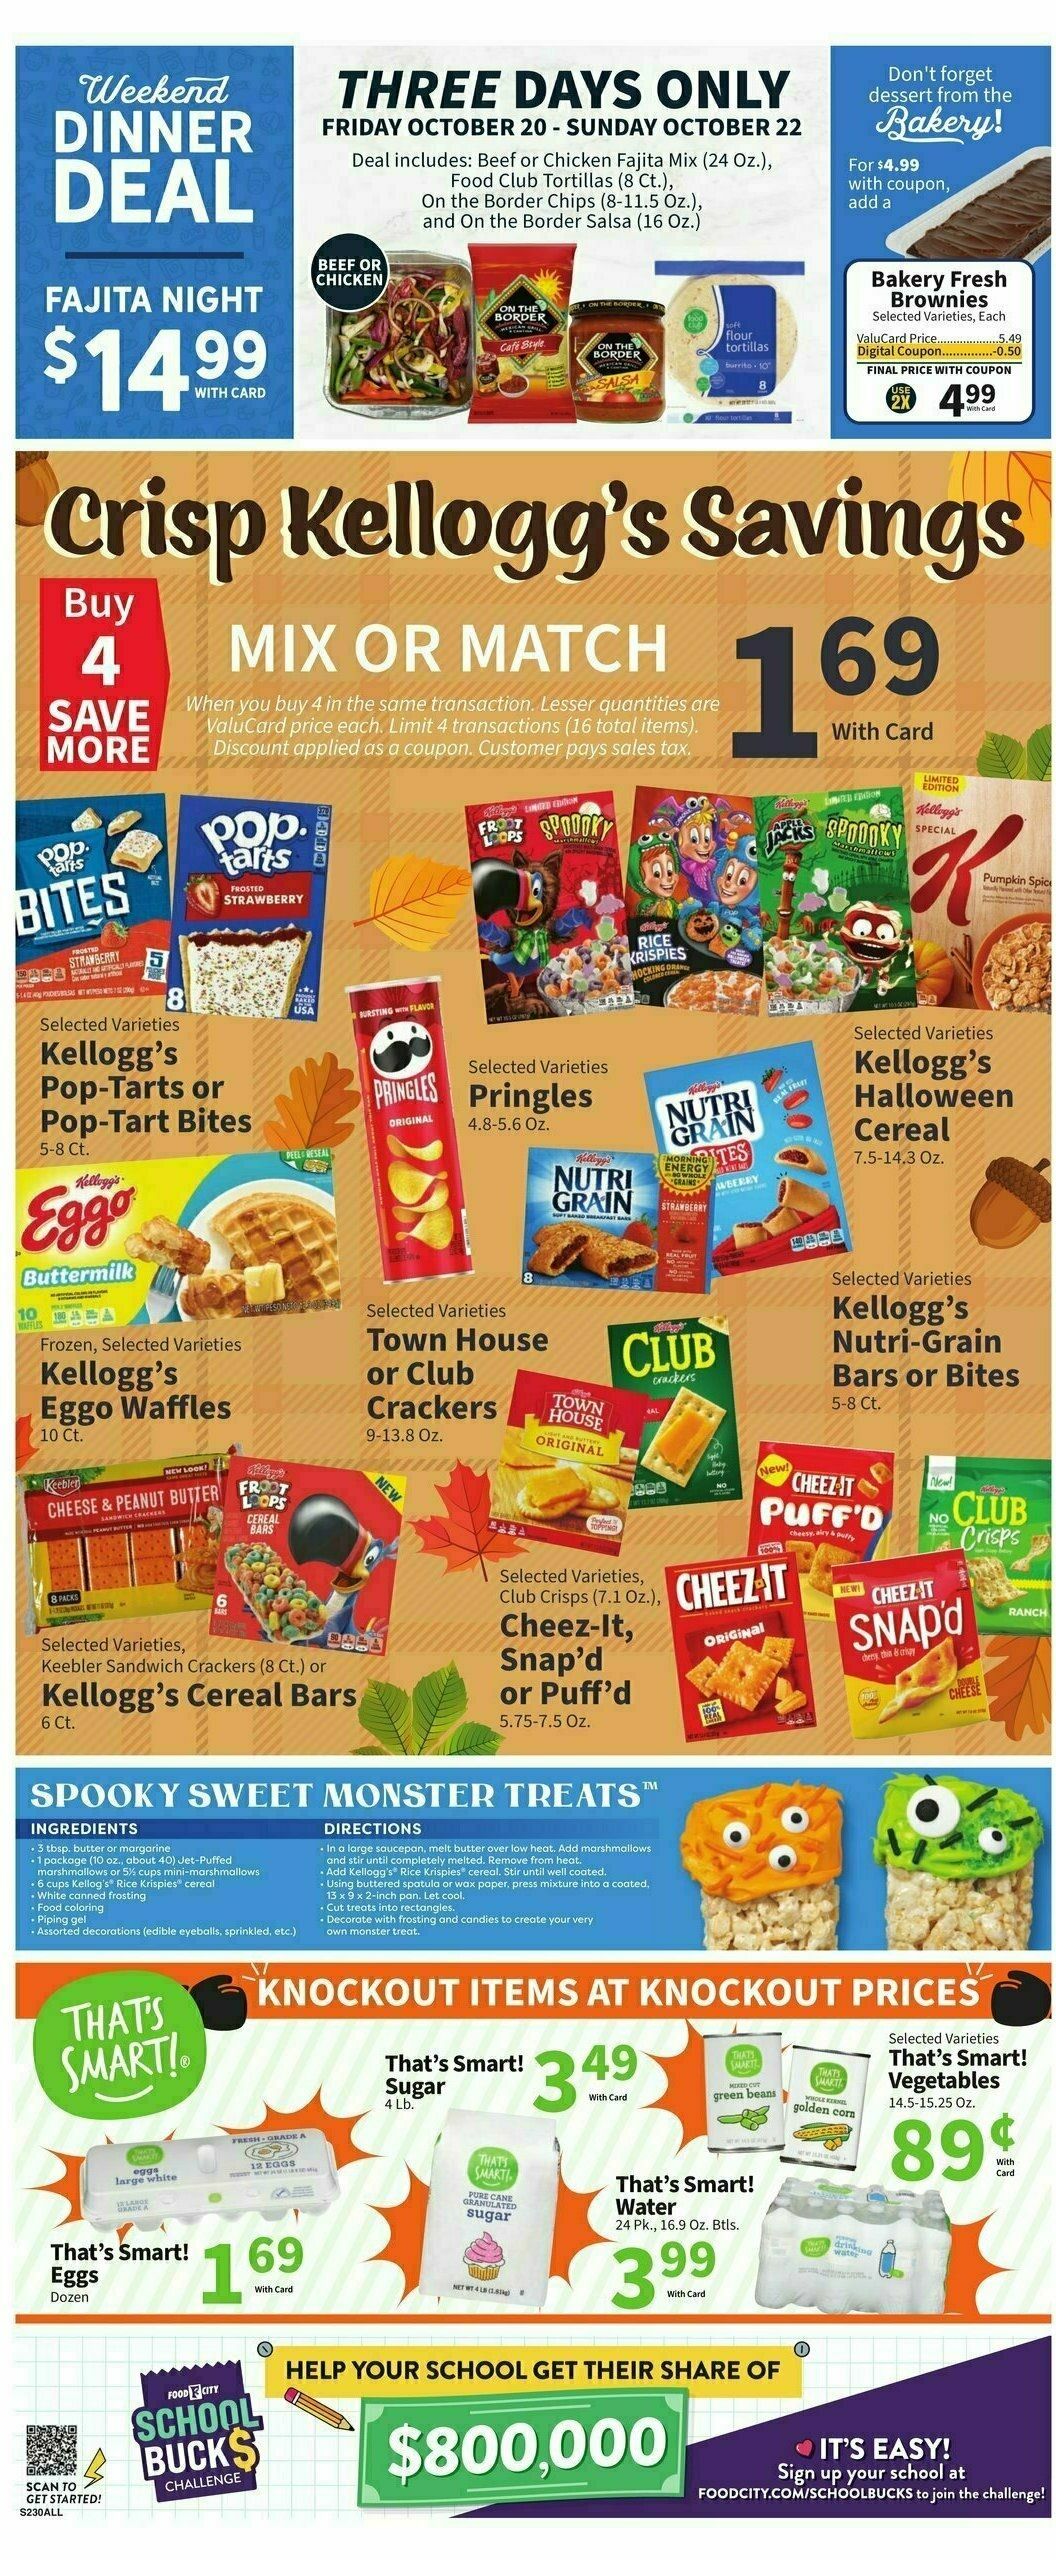 Food City Weekly Ad from October 18